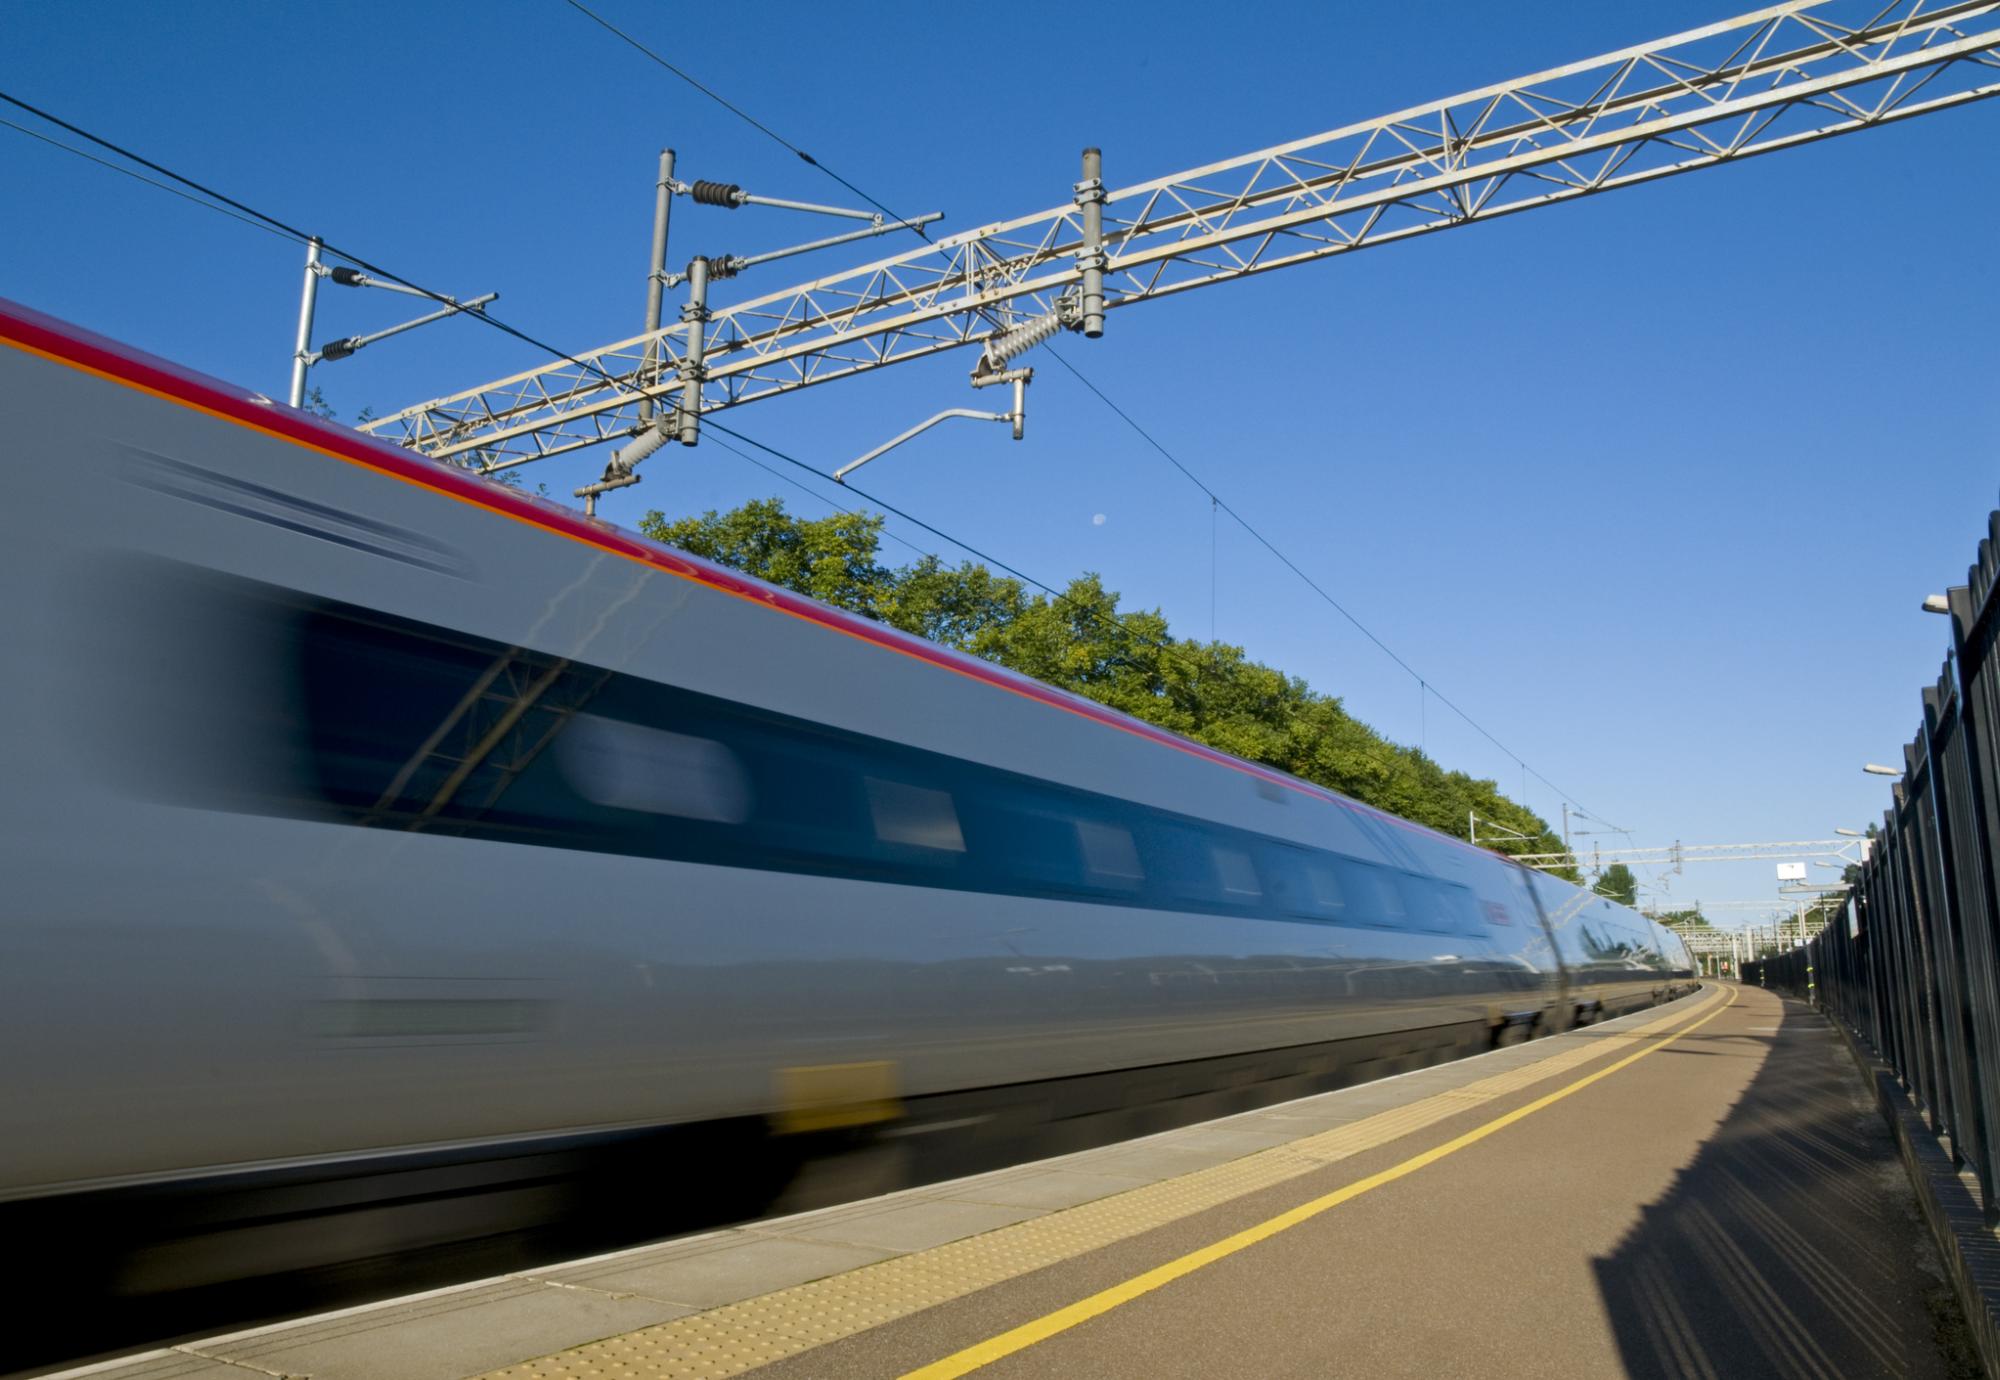 High speed train in the UK